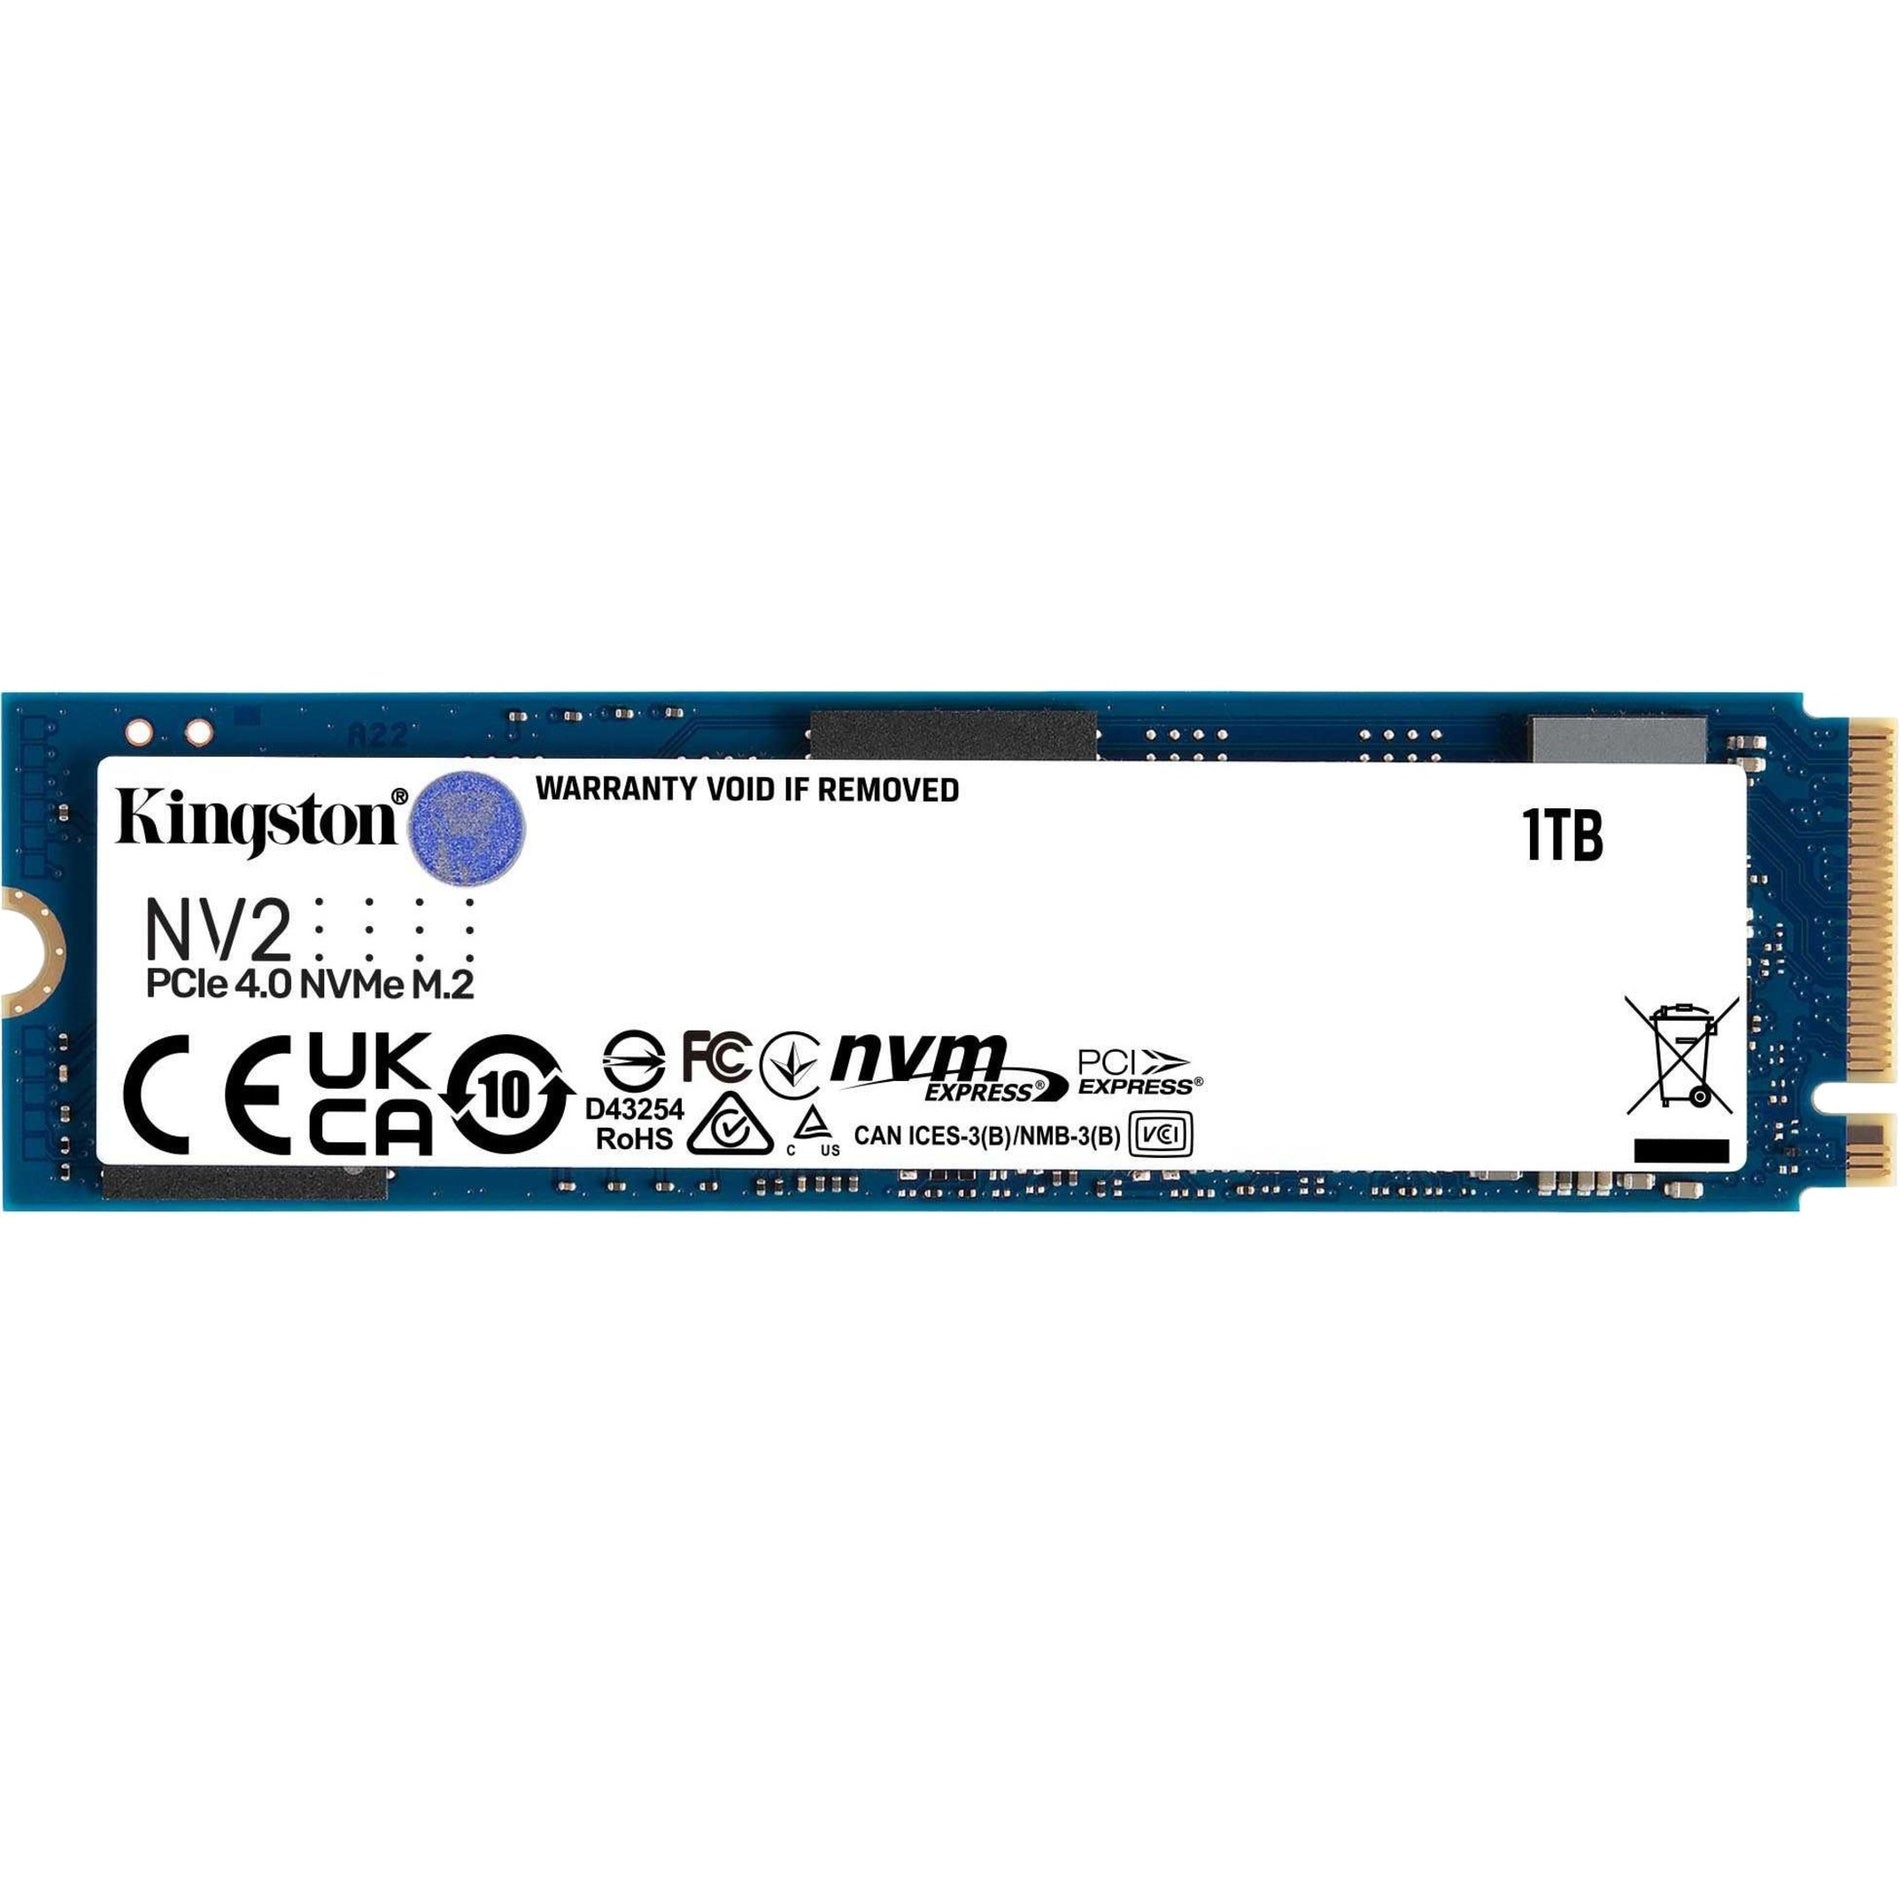 Kingston SNV2S/1000G NV2 PCIe 4.0 NVMe SSD, 1TB M.2 2280 Internal Solid State Drive, Up to 3500 MB/s